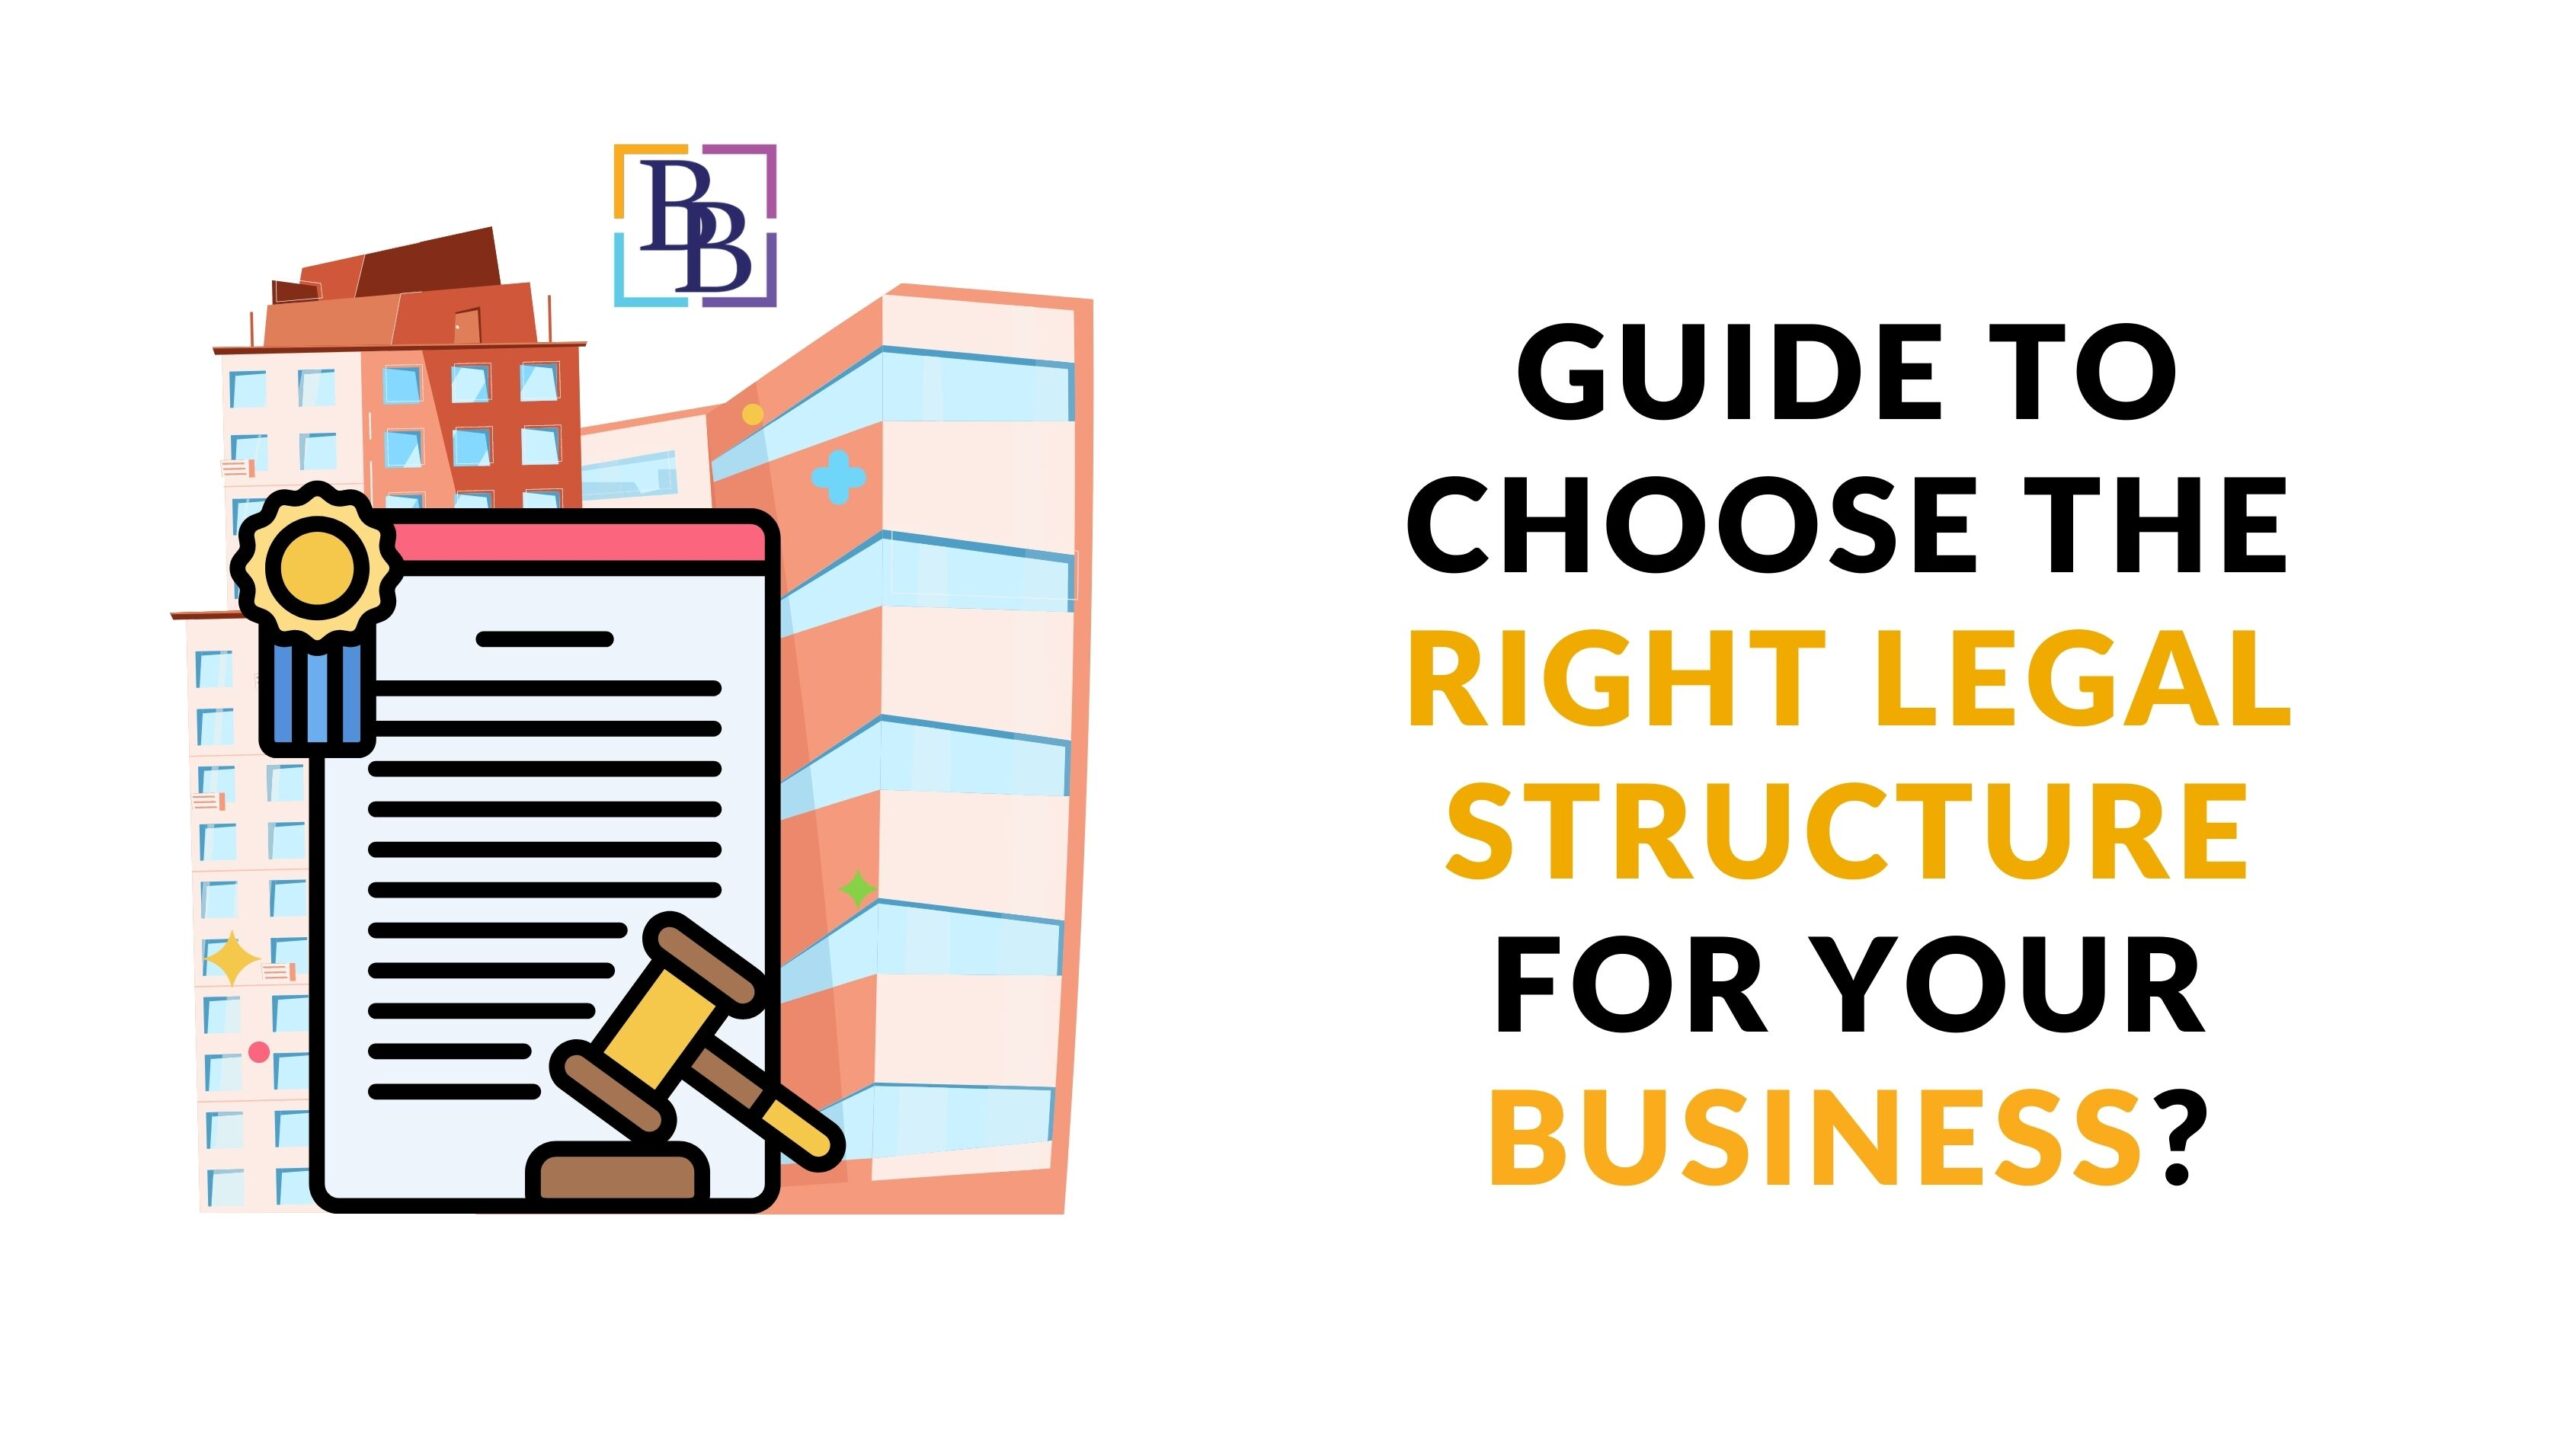 Guide to choose the right legal structure for your business.